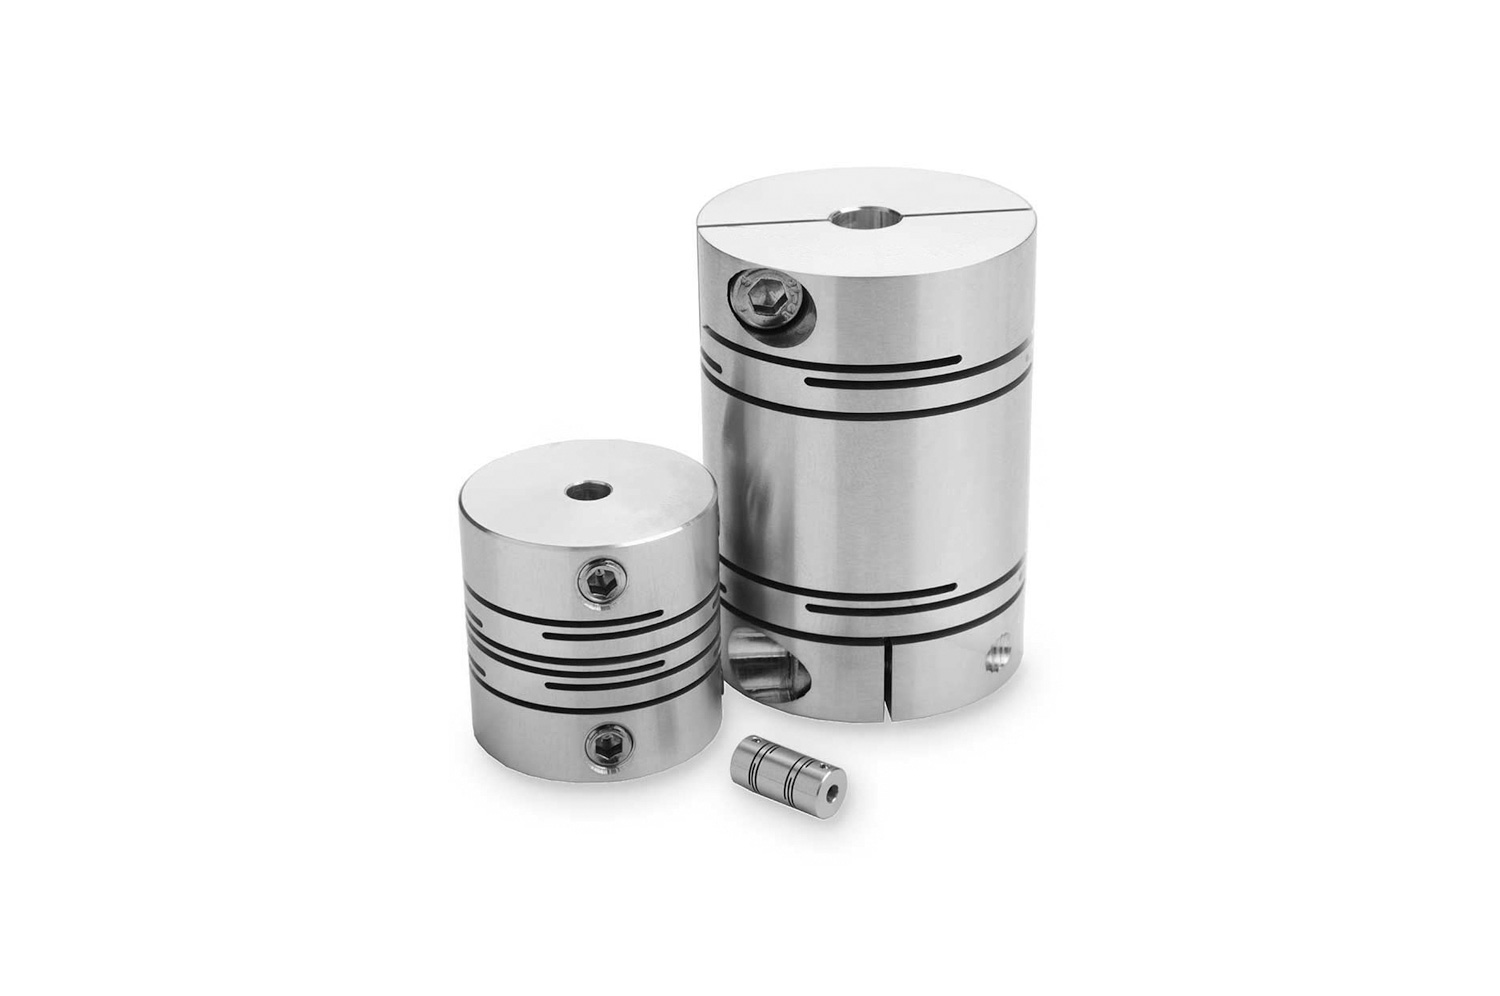 Ruland inventories and supplies a wide range of slit couplings from Reliance Precision